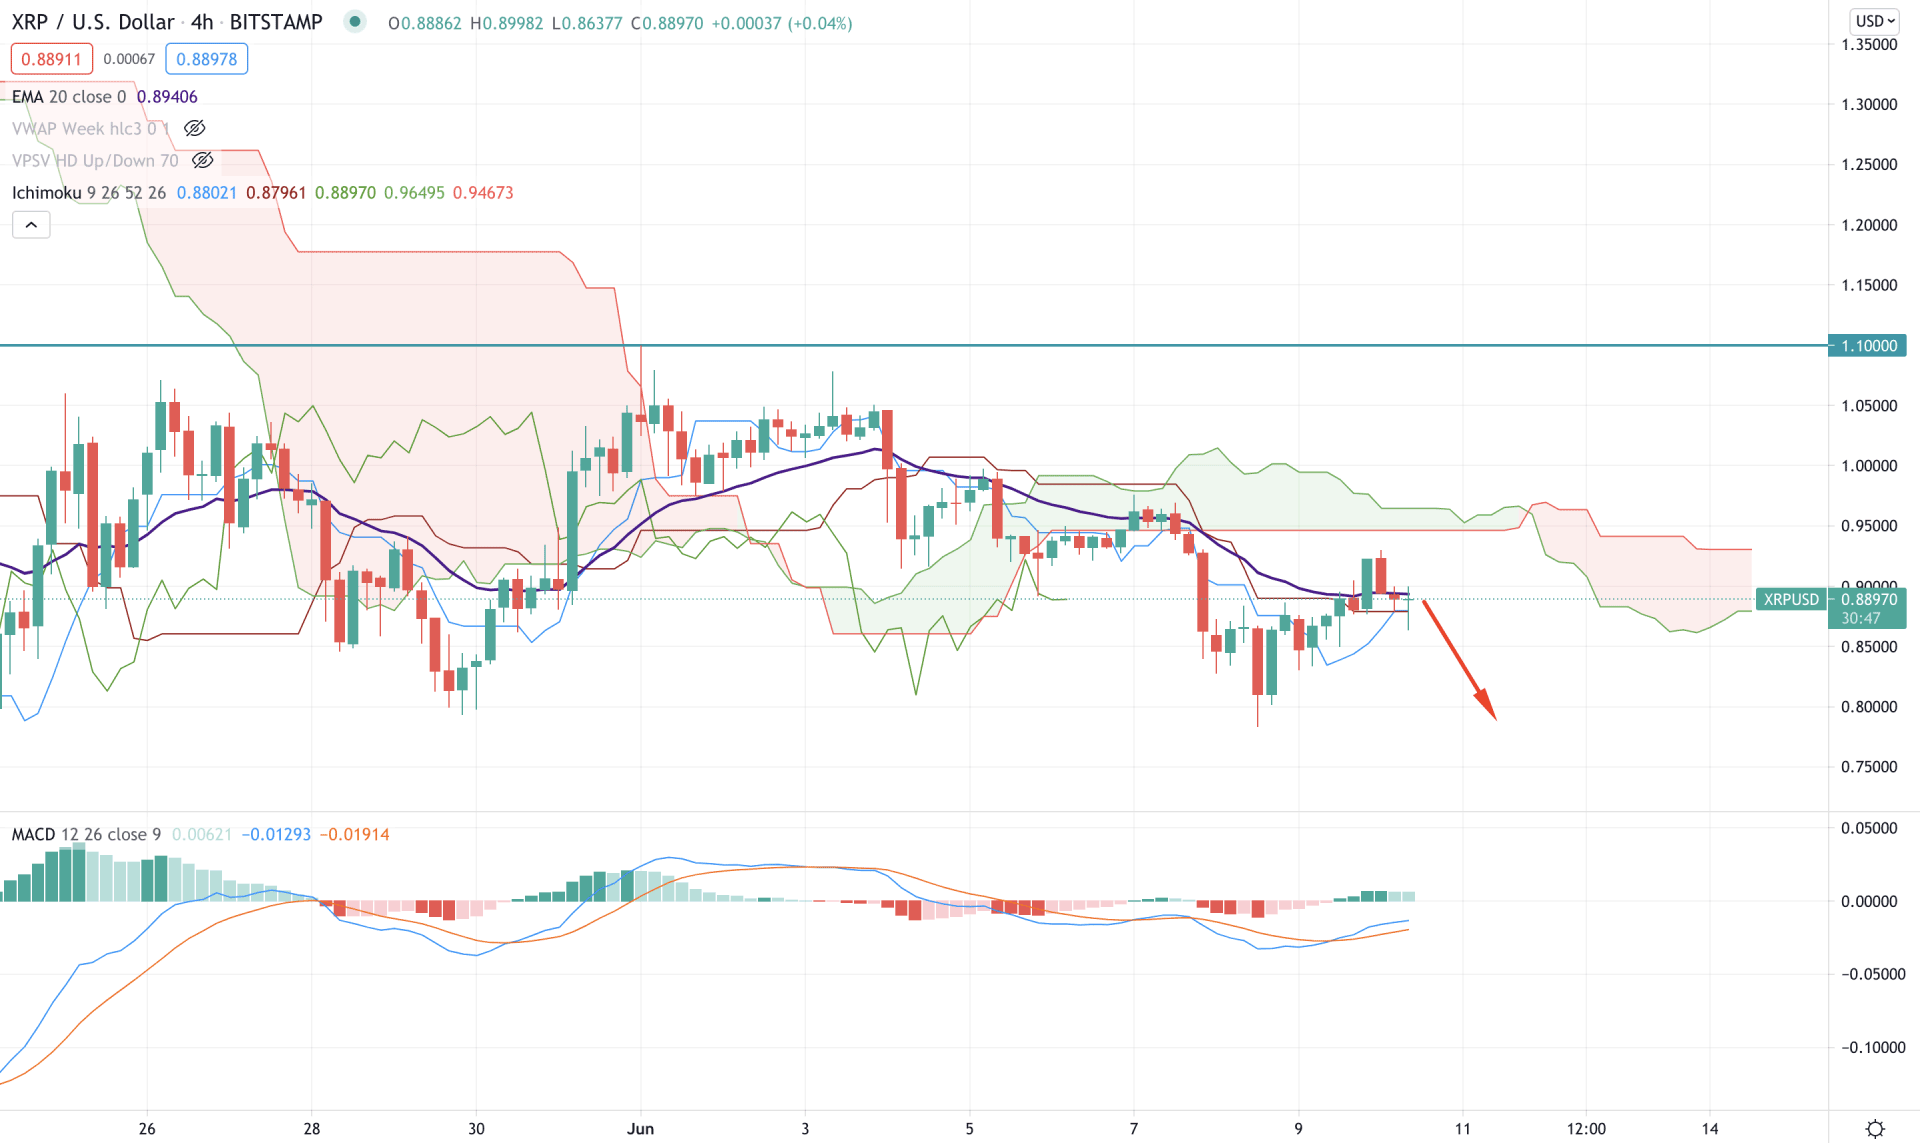 XRP H4 Technical Analysis 10 June 2021